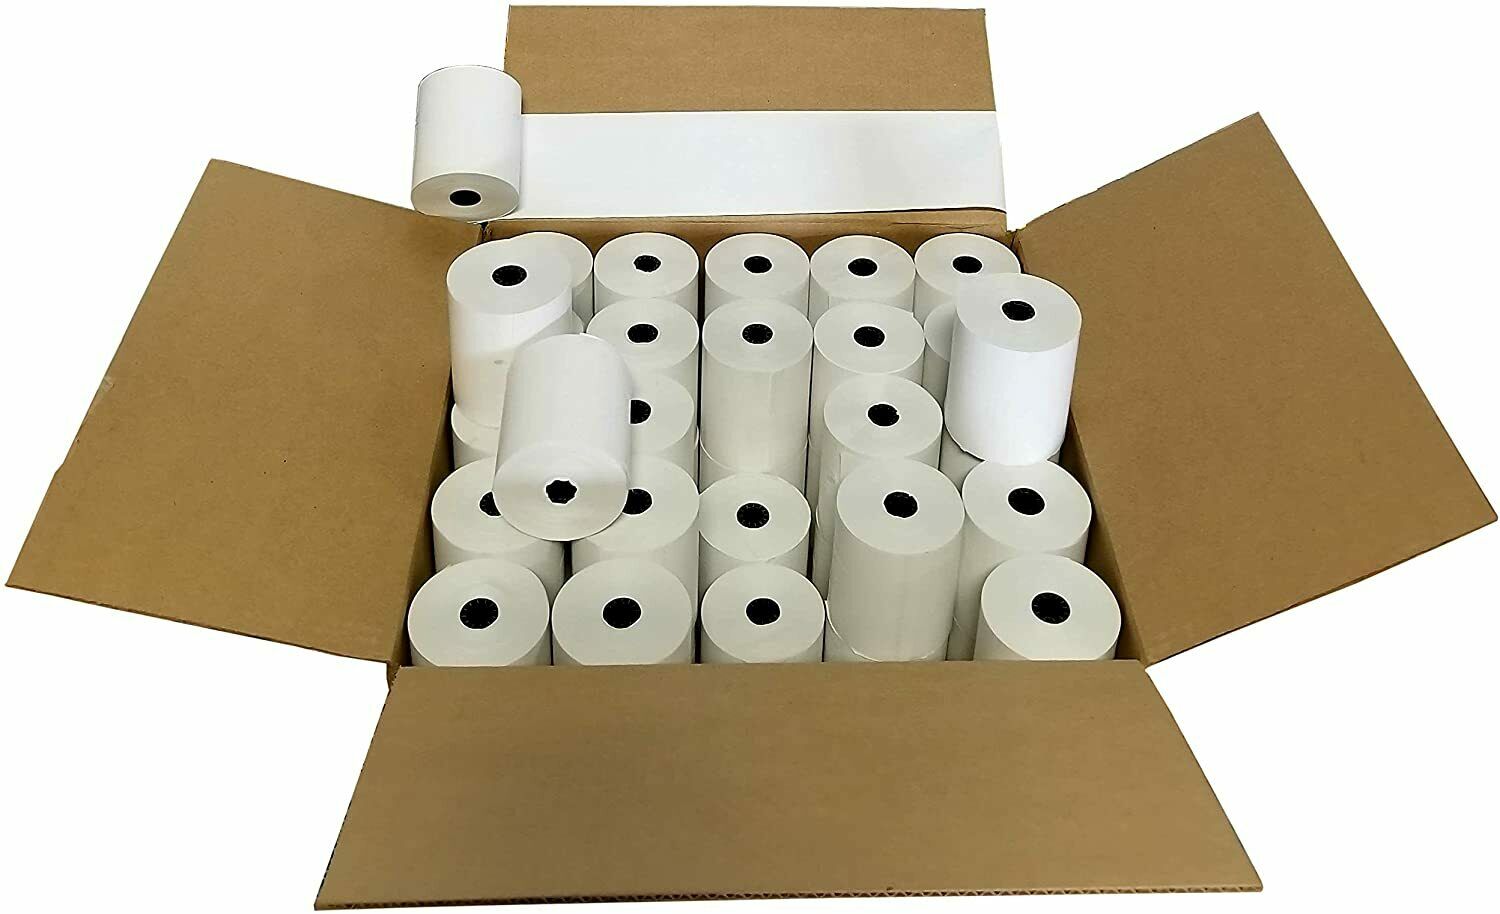 3-1/8" X 230" Thermal Paper Rolls (50 Rolls) Cheapest Price Guaranteed.